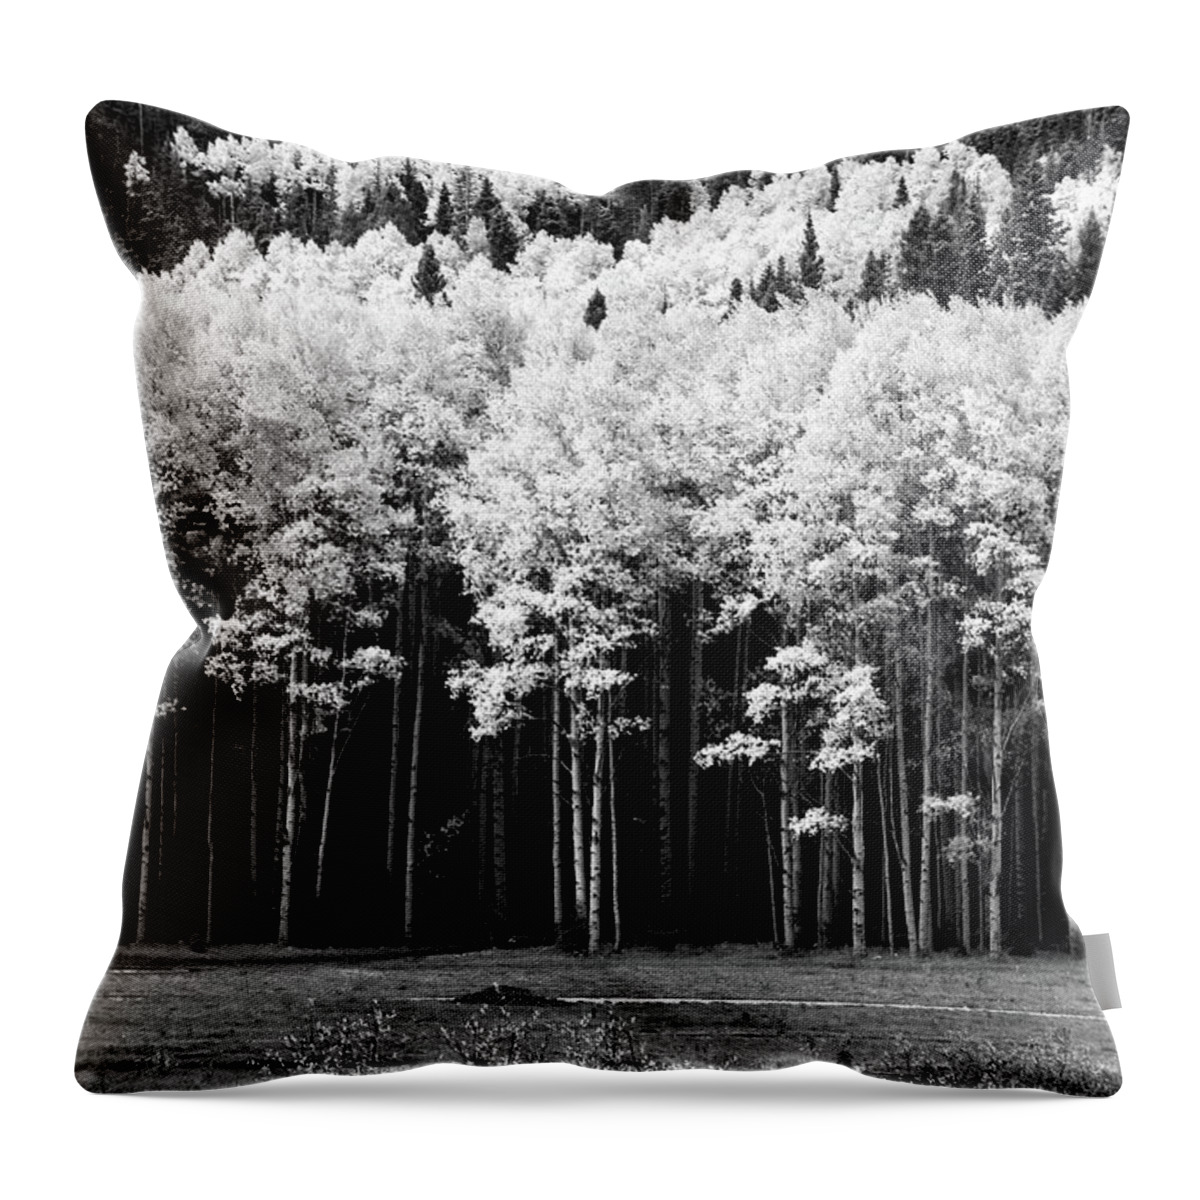 Red River Throw Pillow featuring the photograph New Mexico Aspens by Ron Weathers